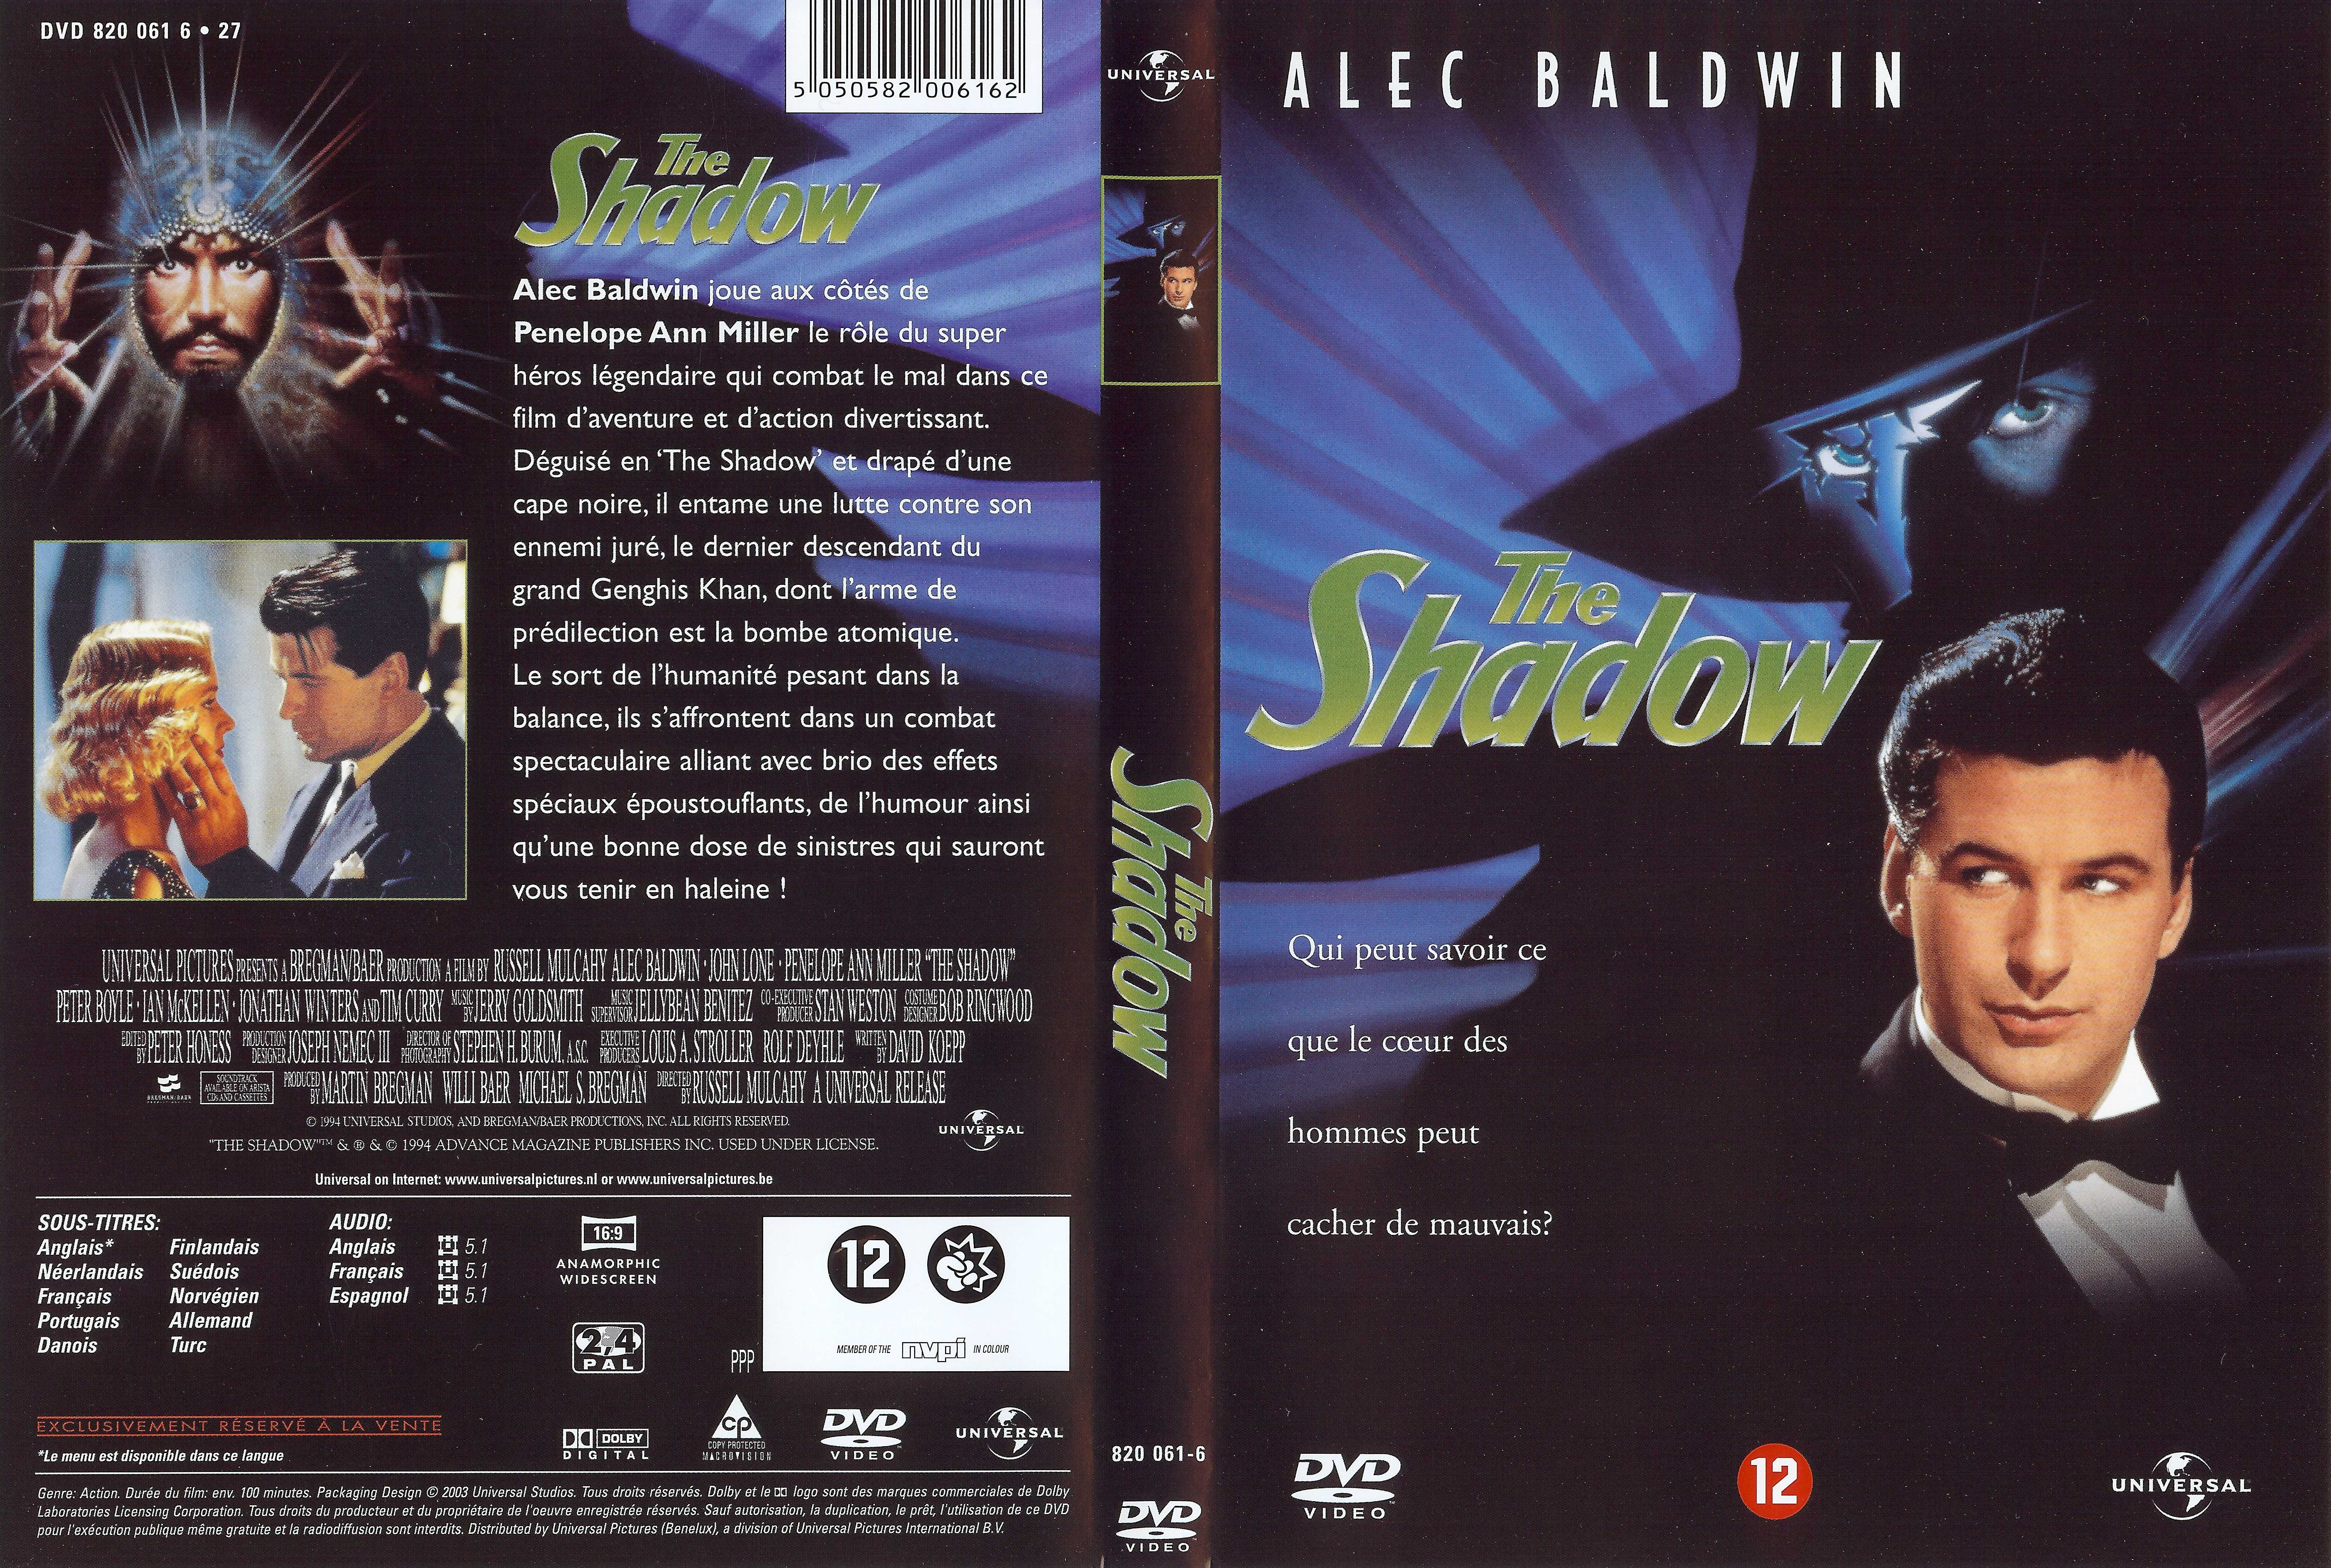 Jaquette DVD The shadow